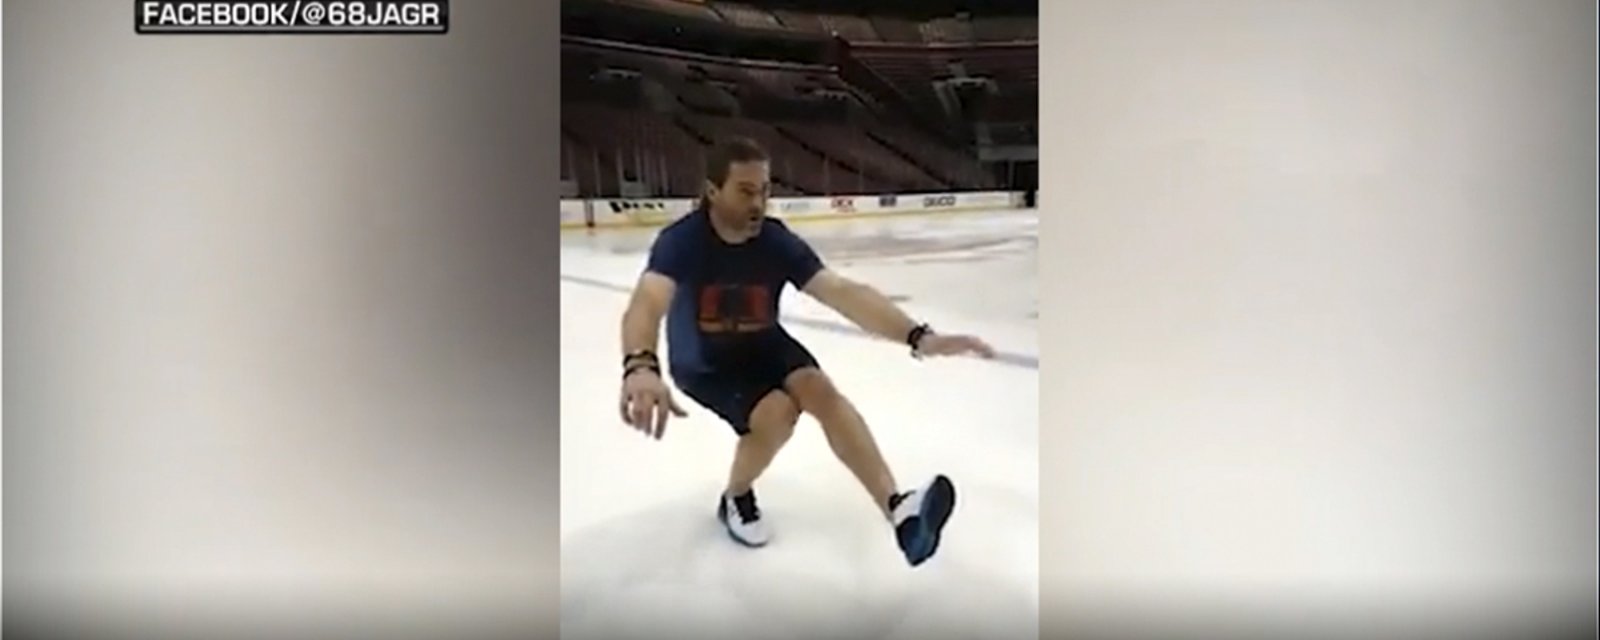 Jagr, 45-years-old, challenges fans to attempt his latest workout routine